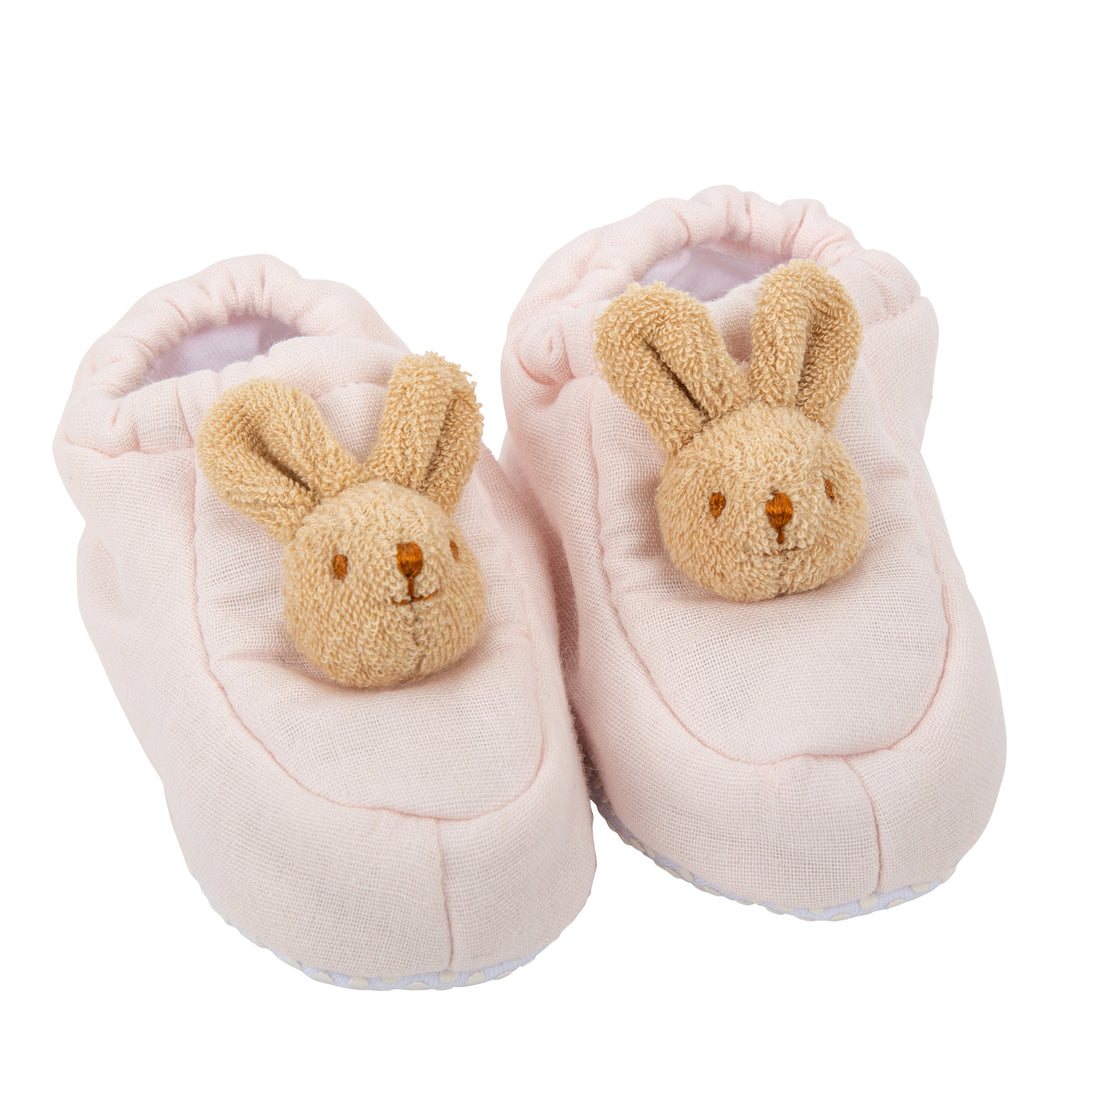 trousselier-slippers-bunny-0-2-years-pouder-pink-linen-trou-v118064-1